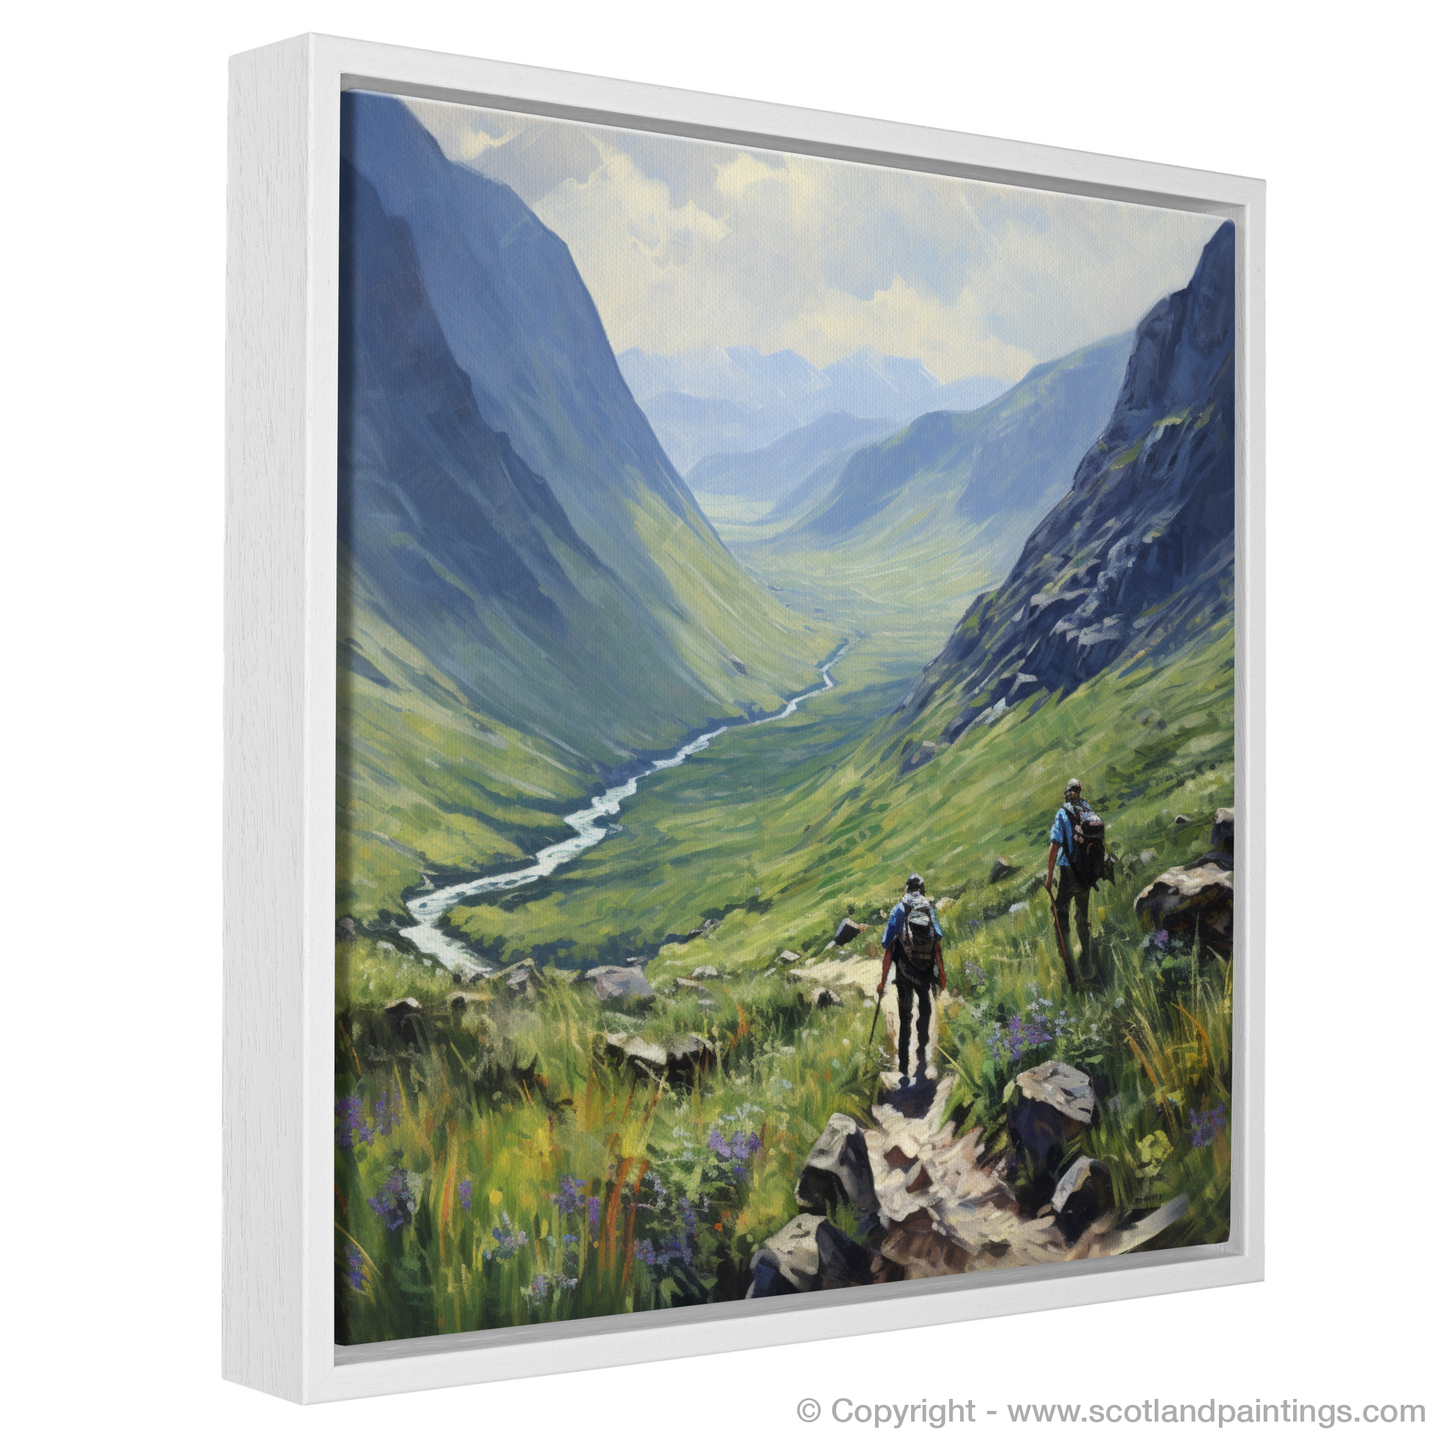 Painting and Art Print of Hikers in Glencoe entitled "Highland Wanderers in the Heart of Glencoe".